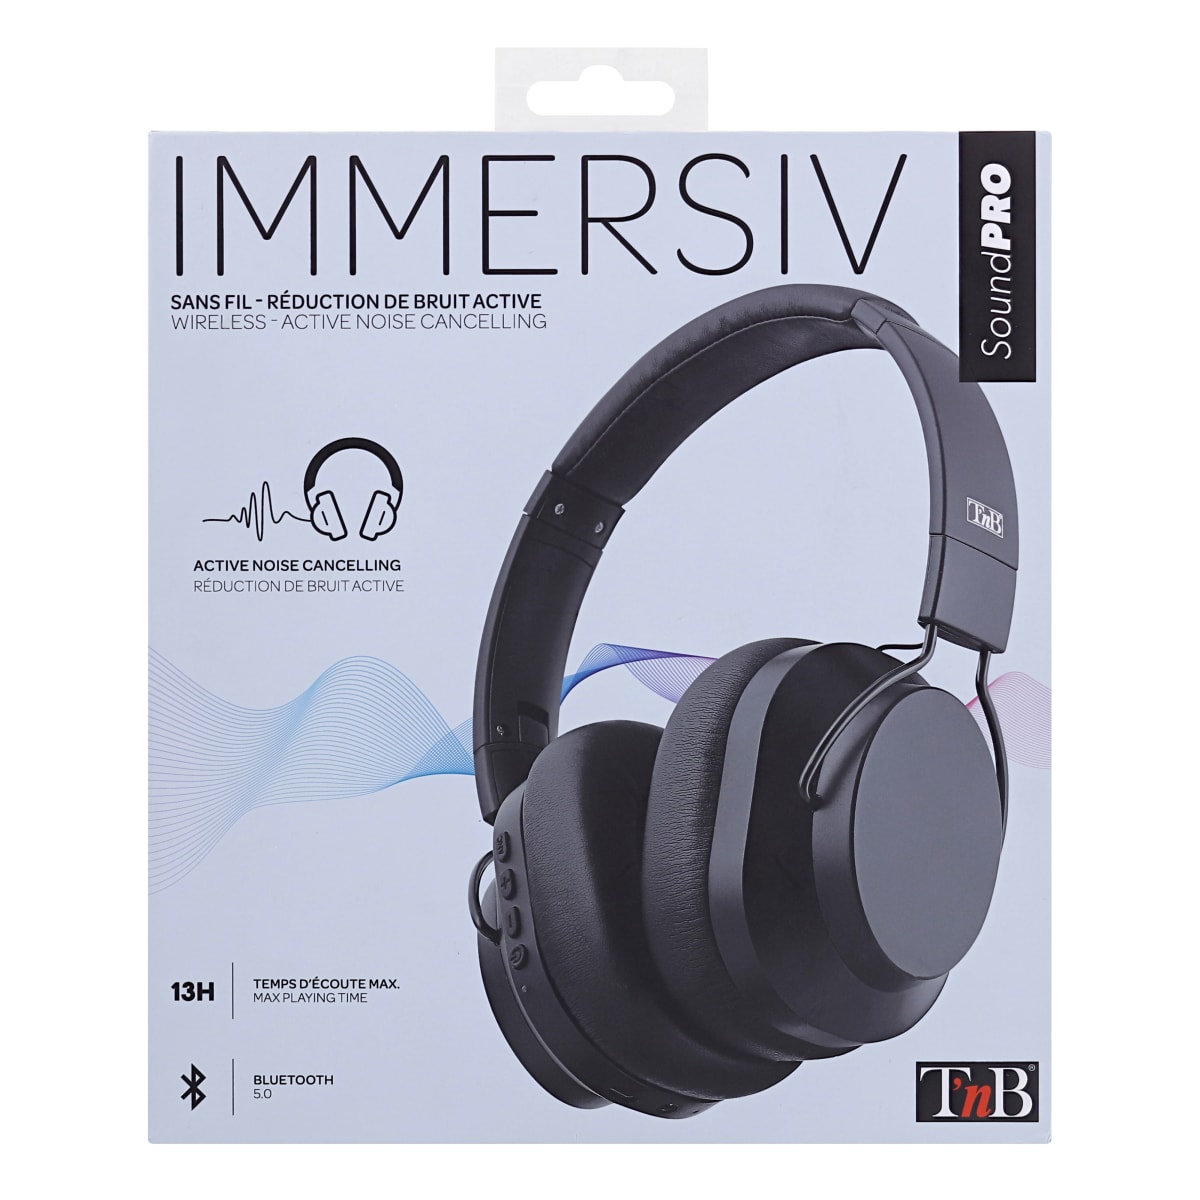 IMMERSIVE noise cancelling bluetooth headphone - T'nB